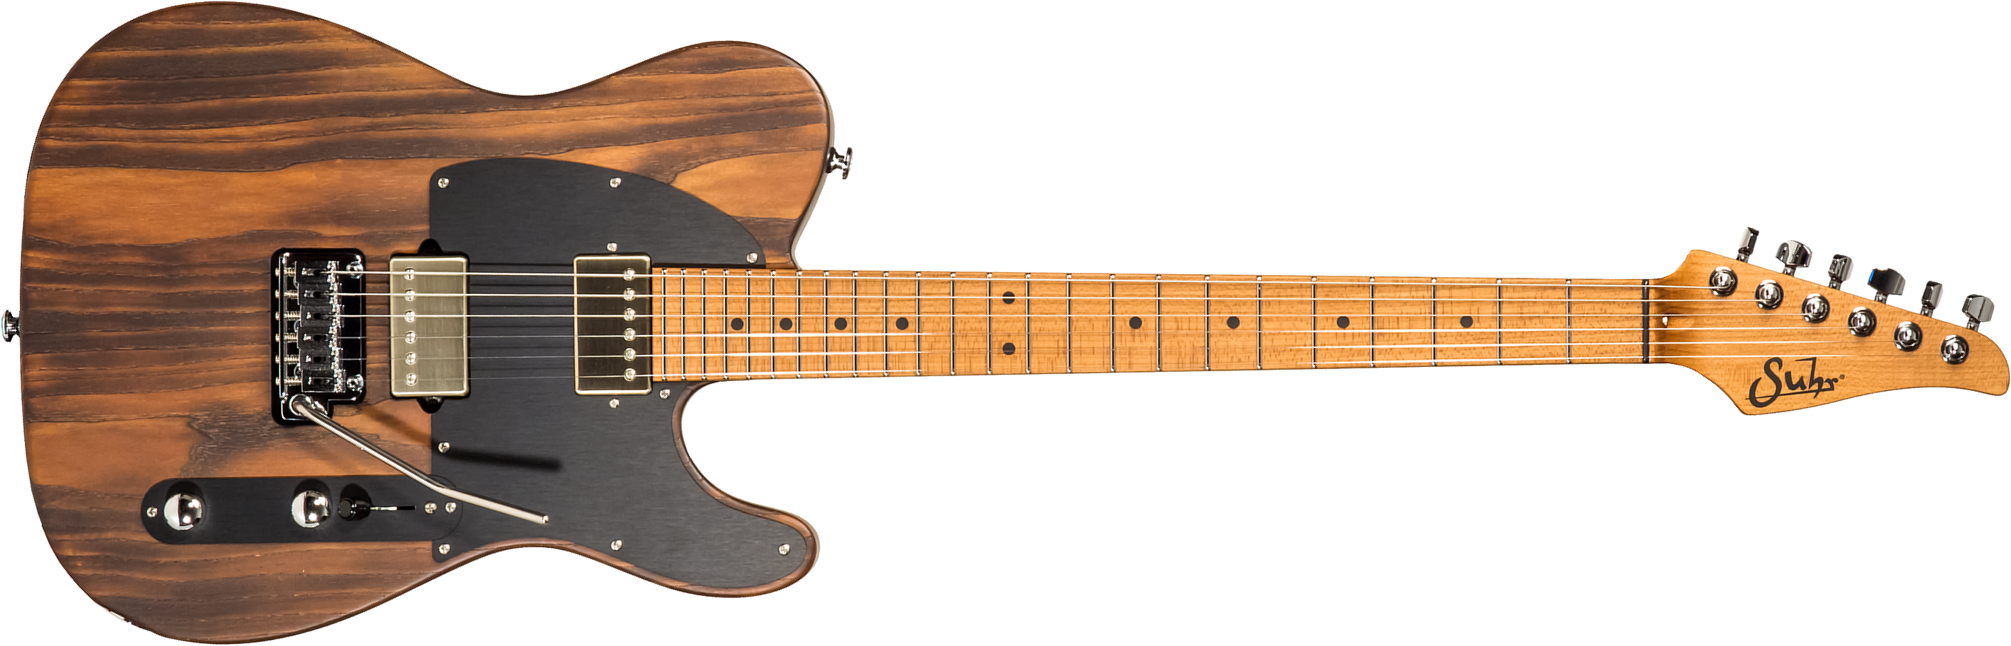 Suhr Andy Wood Modern T 01-sig-0033 Usa Signature 2h Trem Mn #72794 - Whiskey Barrel - E-Gitarre in Teleform - Main picture